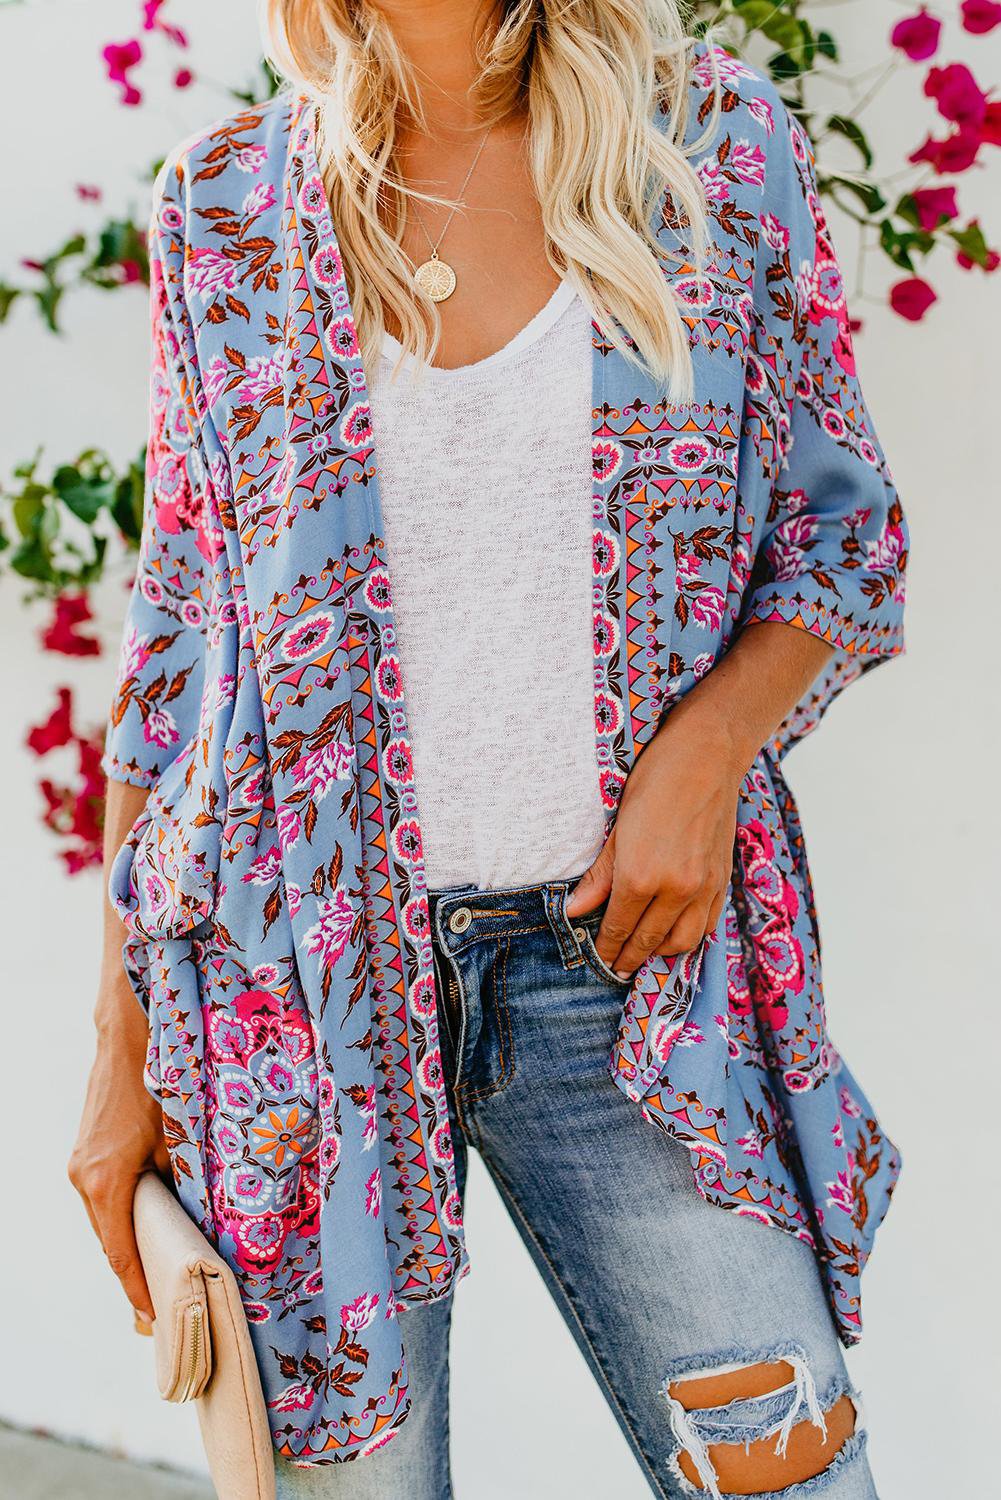 Sky Blue Floral Kimono Cardigan Open Front Cover Up